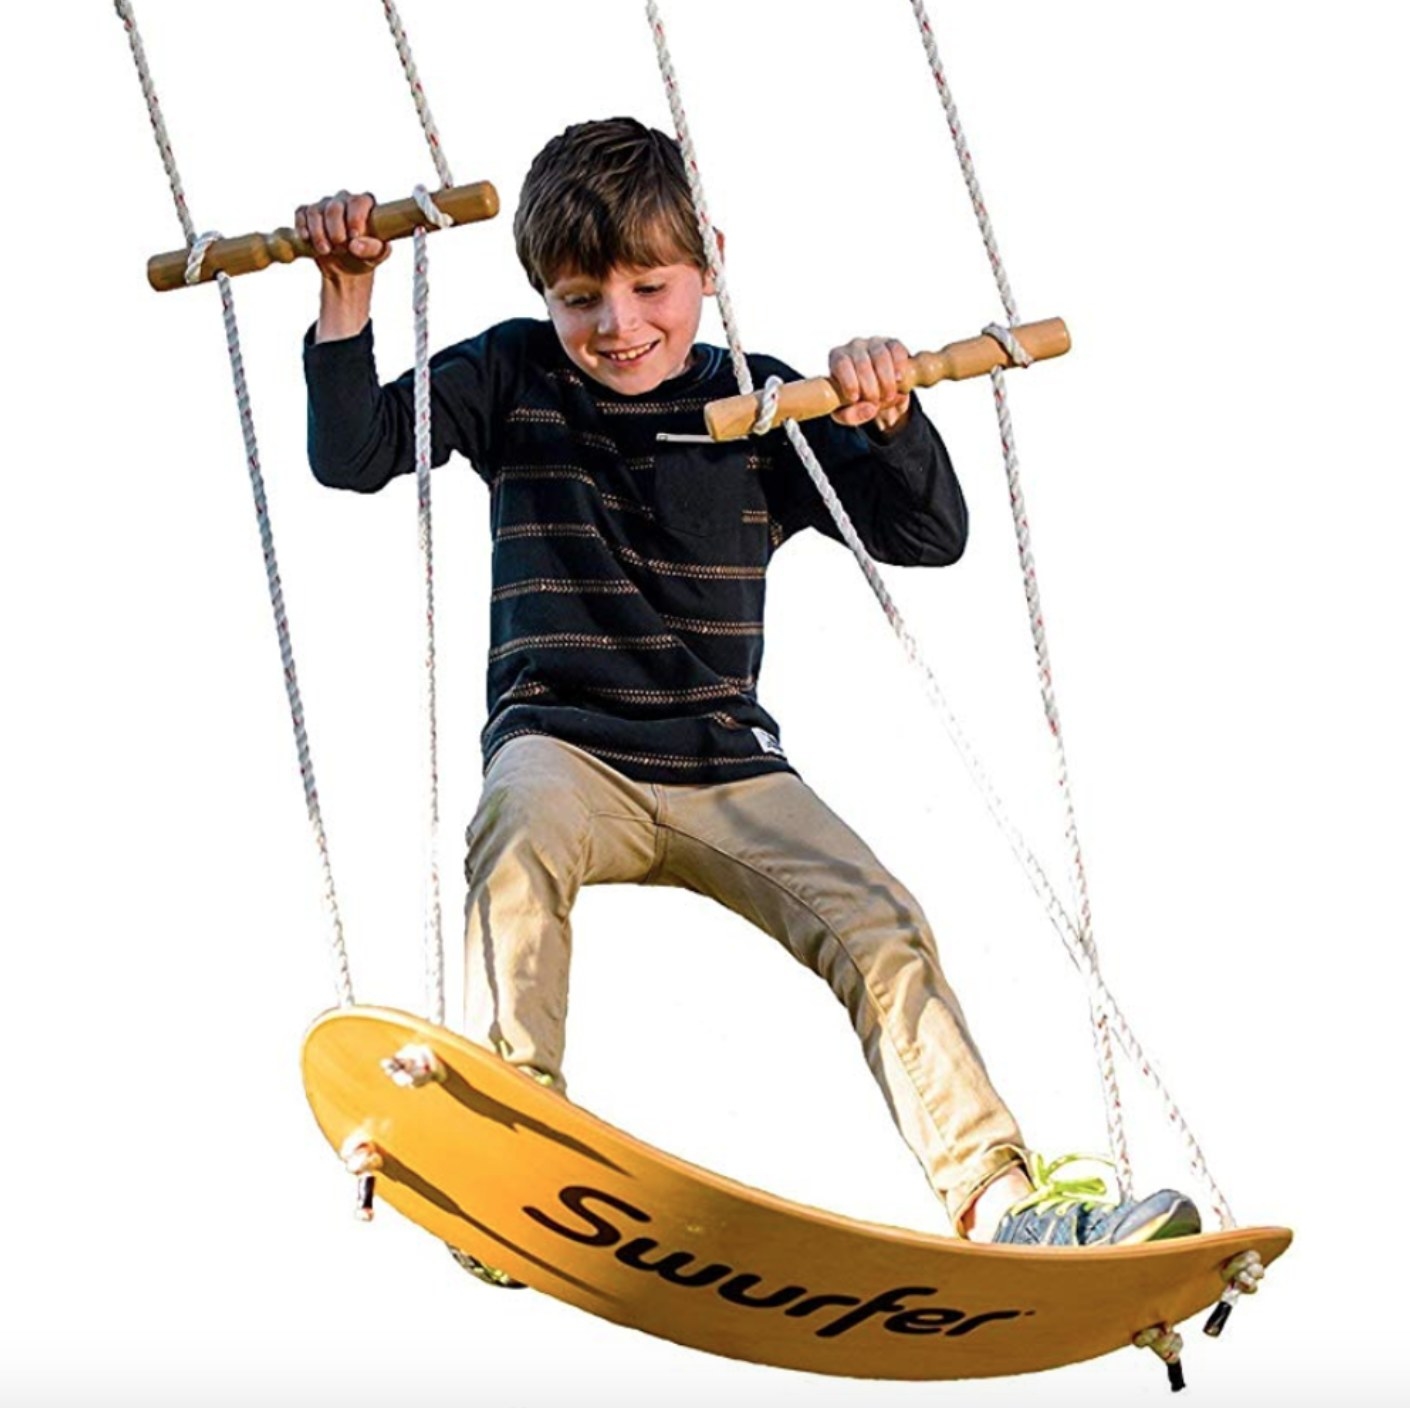 The stand up swurfer swing with a yellow base